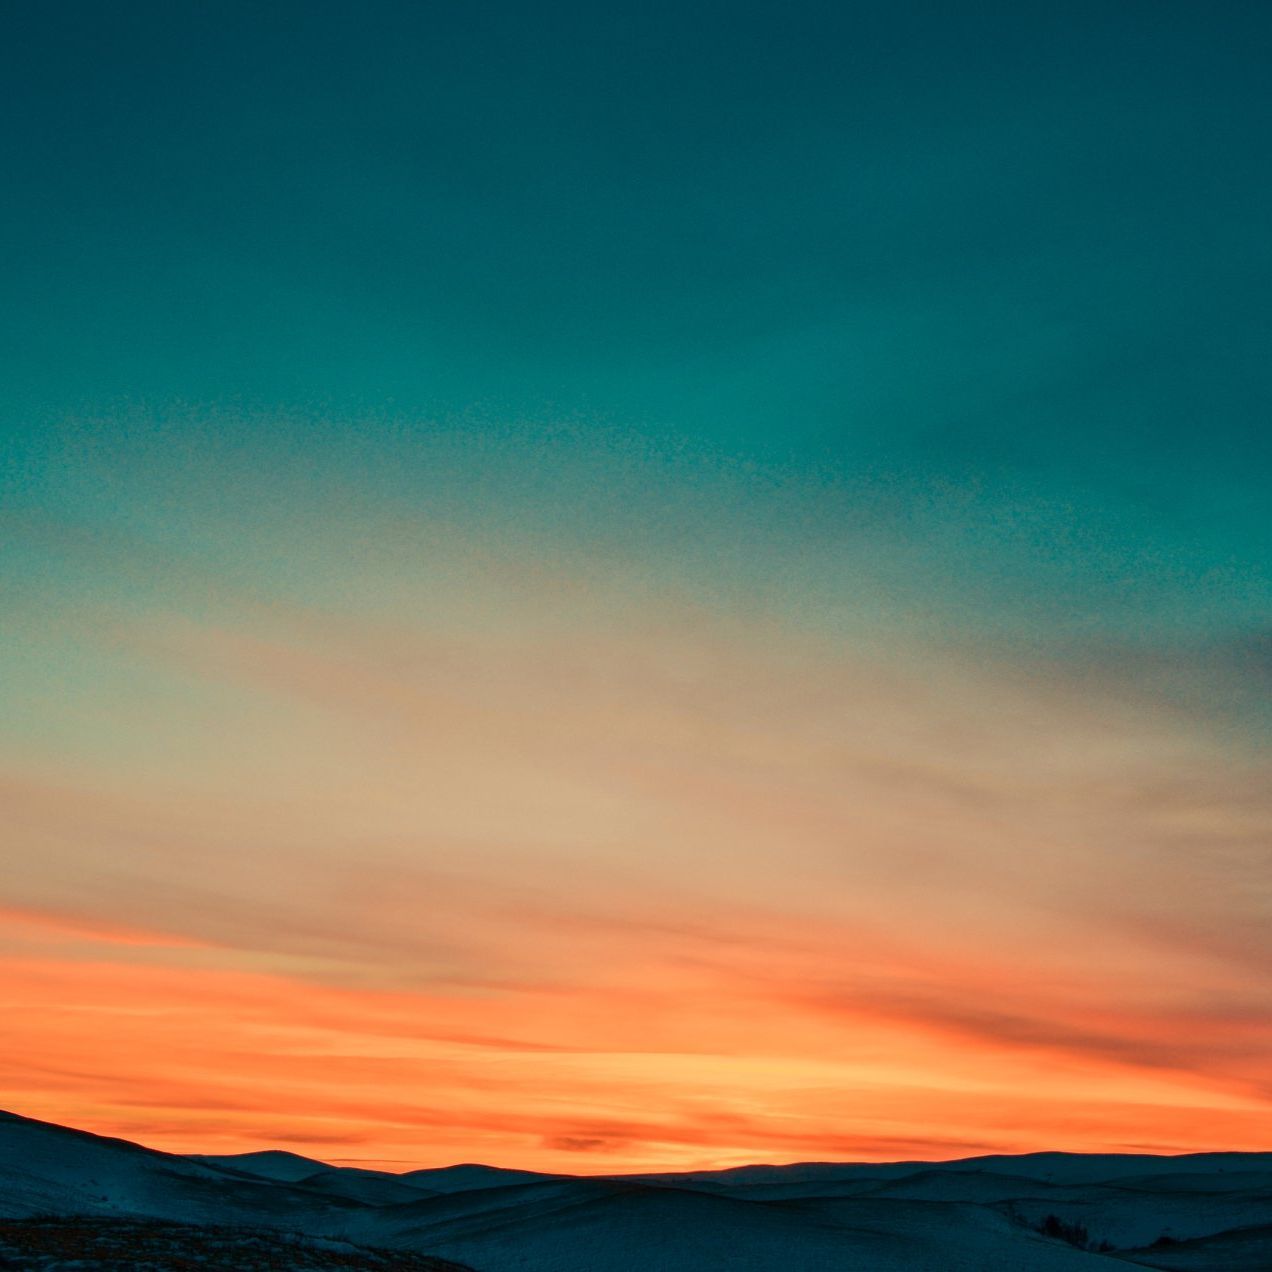 a sunset over a snowy mountain range with a blue sky